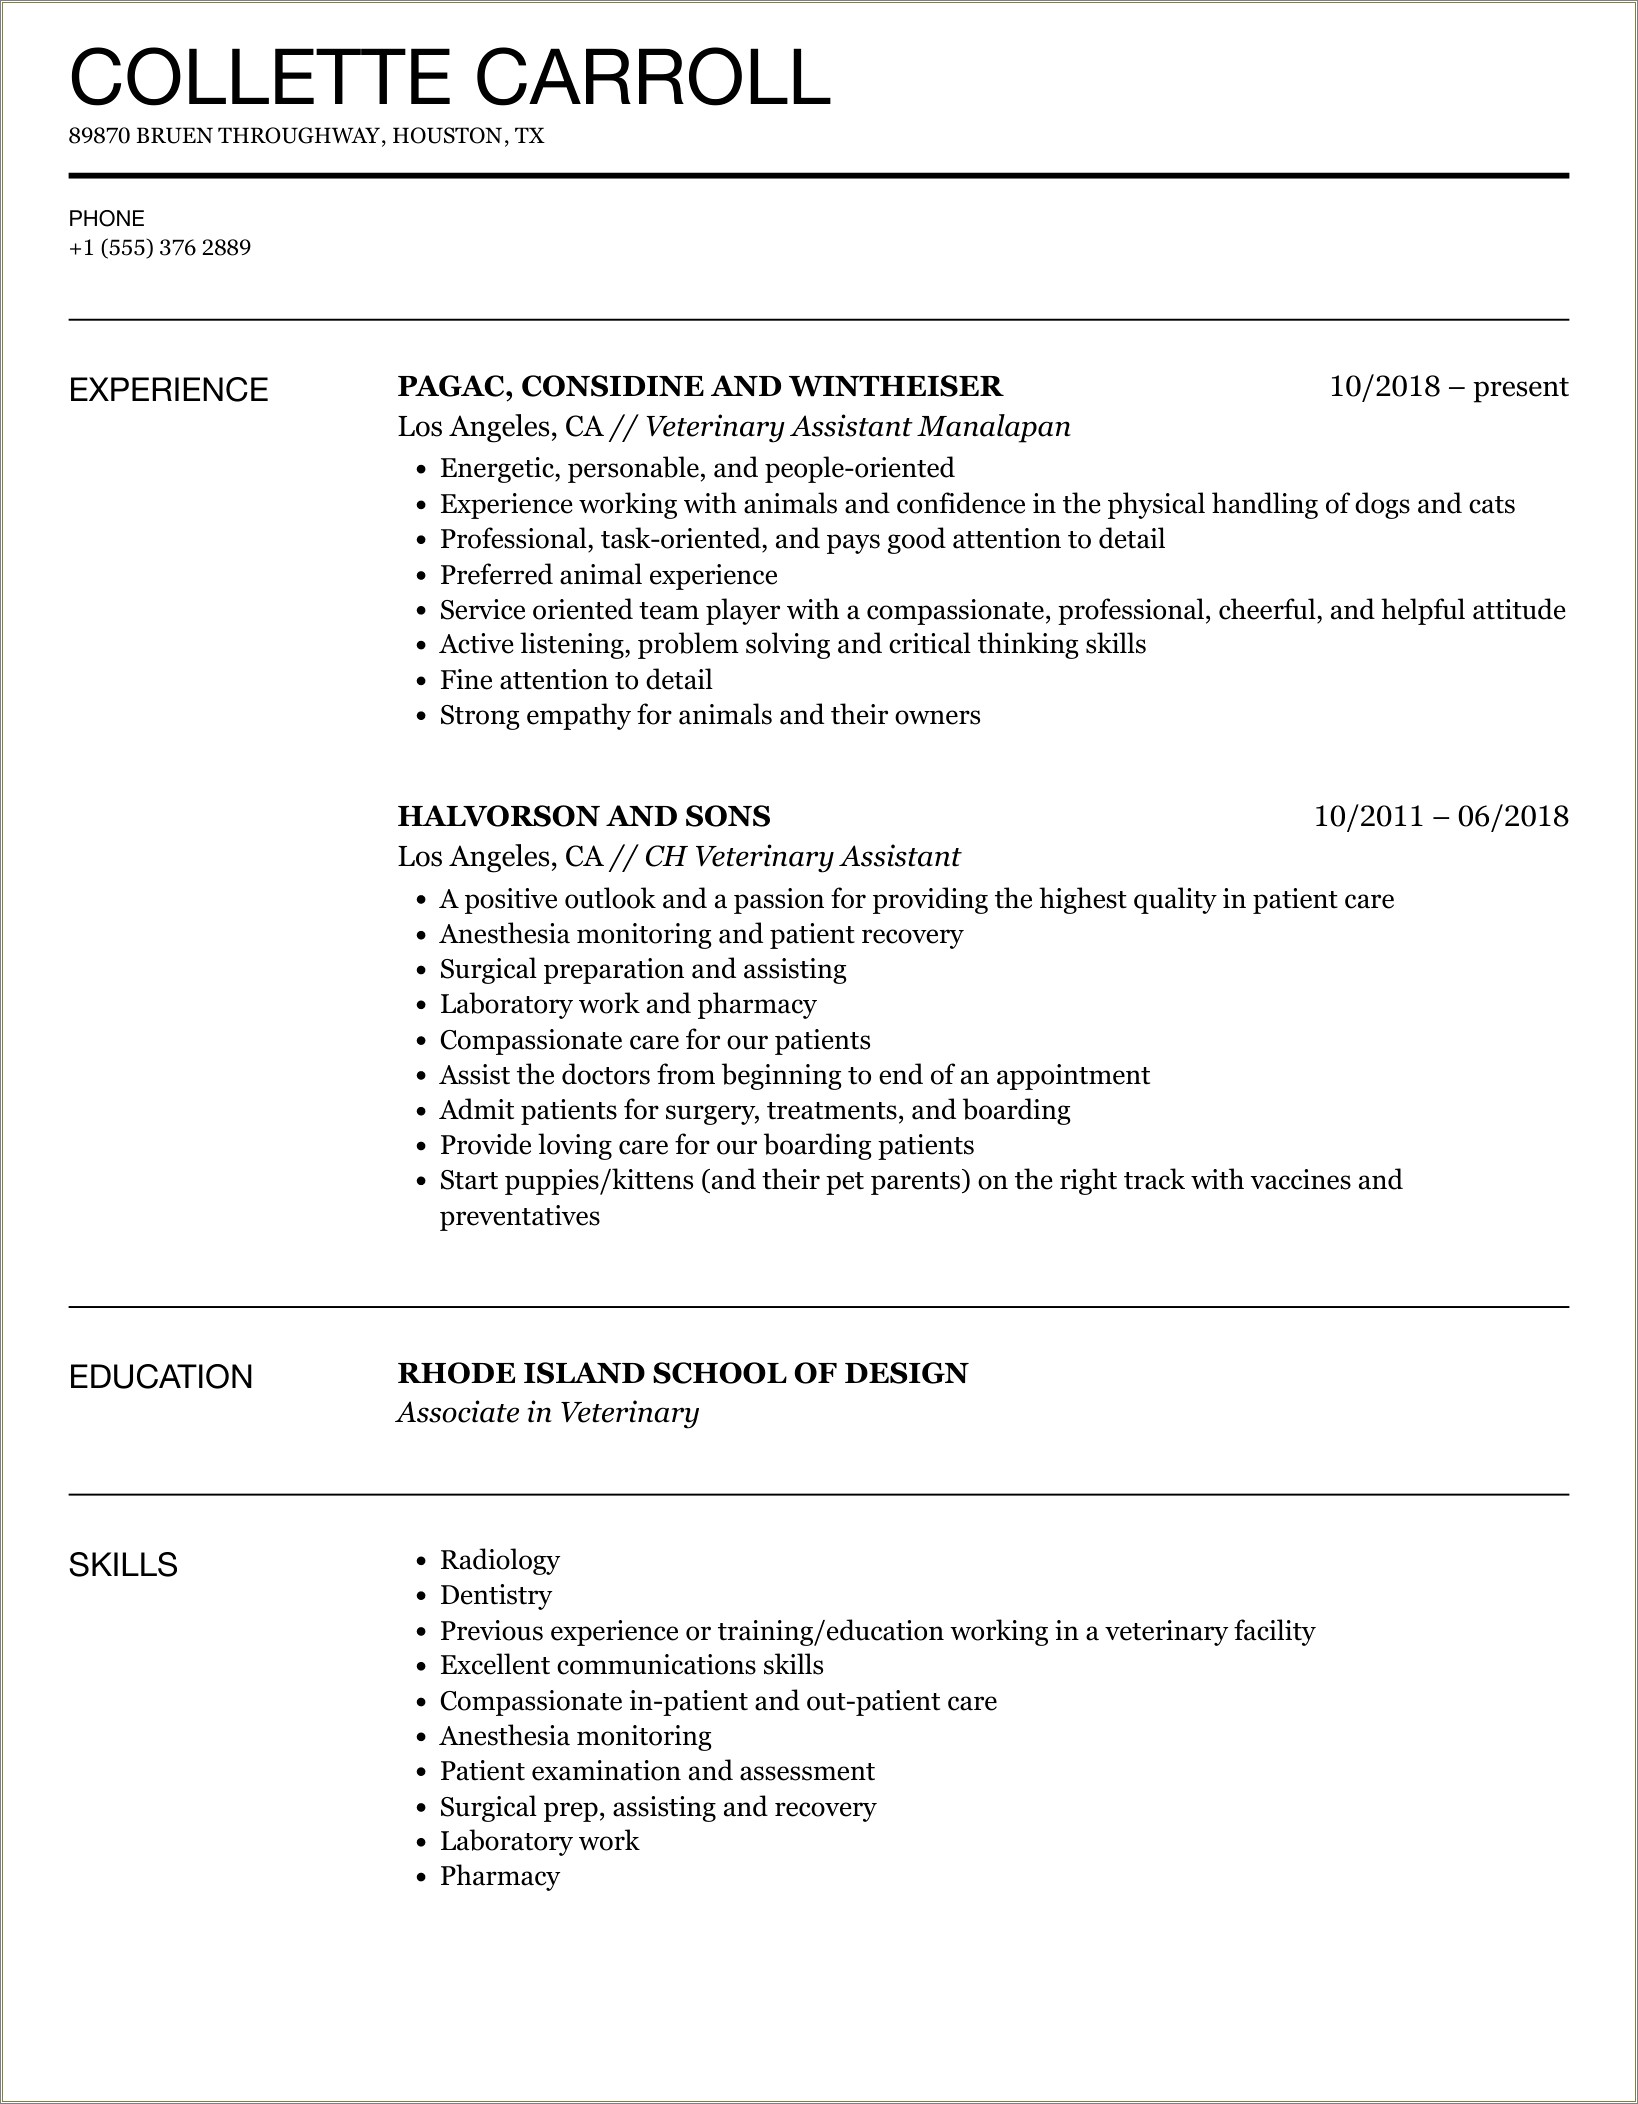 Resume For Veterinary Assistant With No Experience